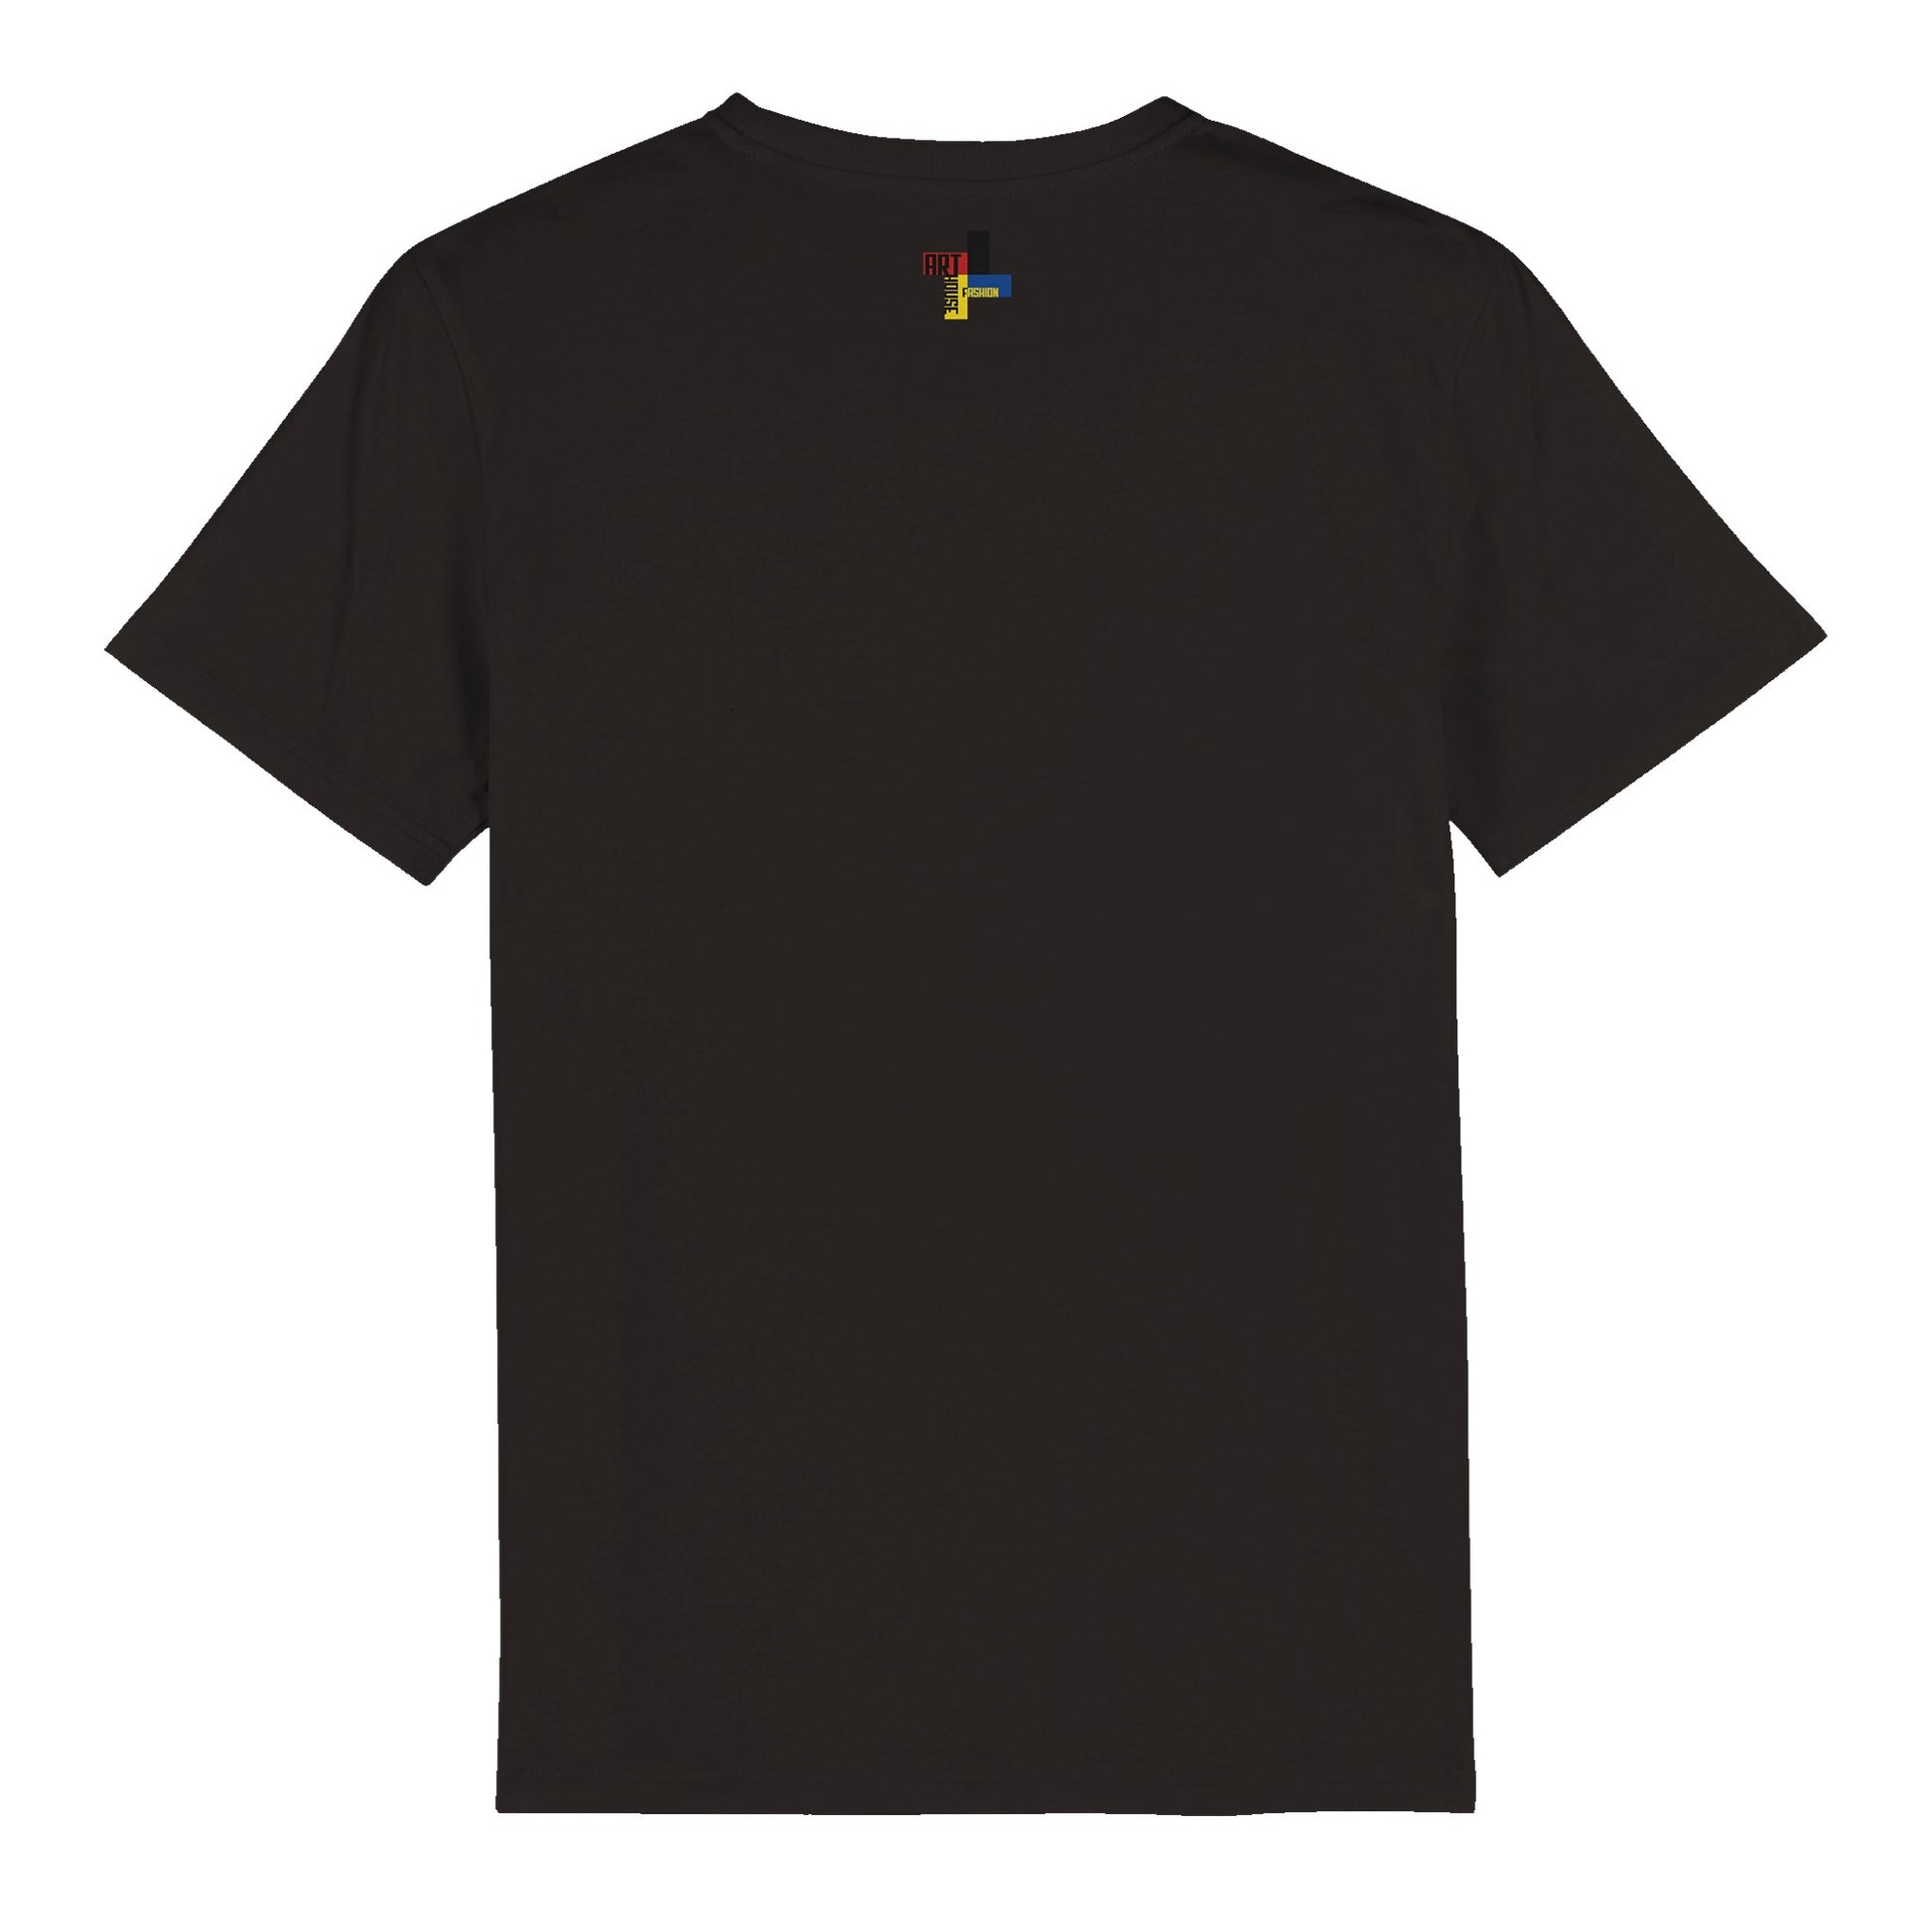 a black t - shirt with logo